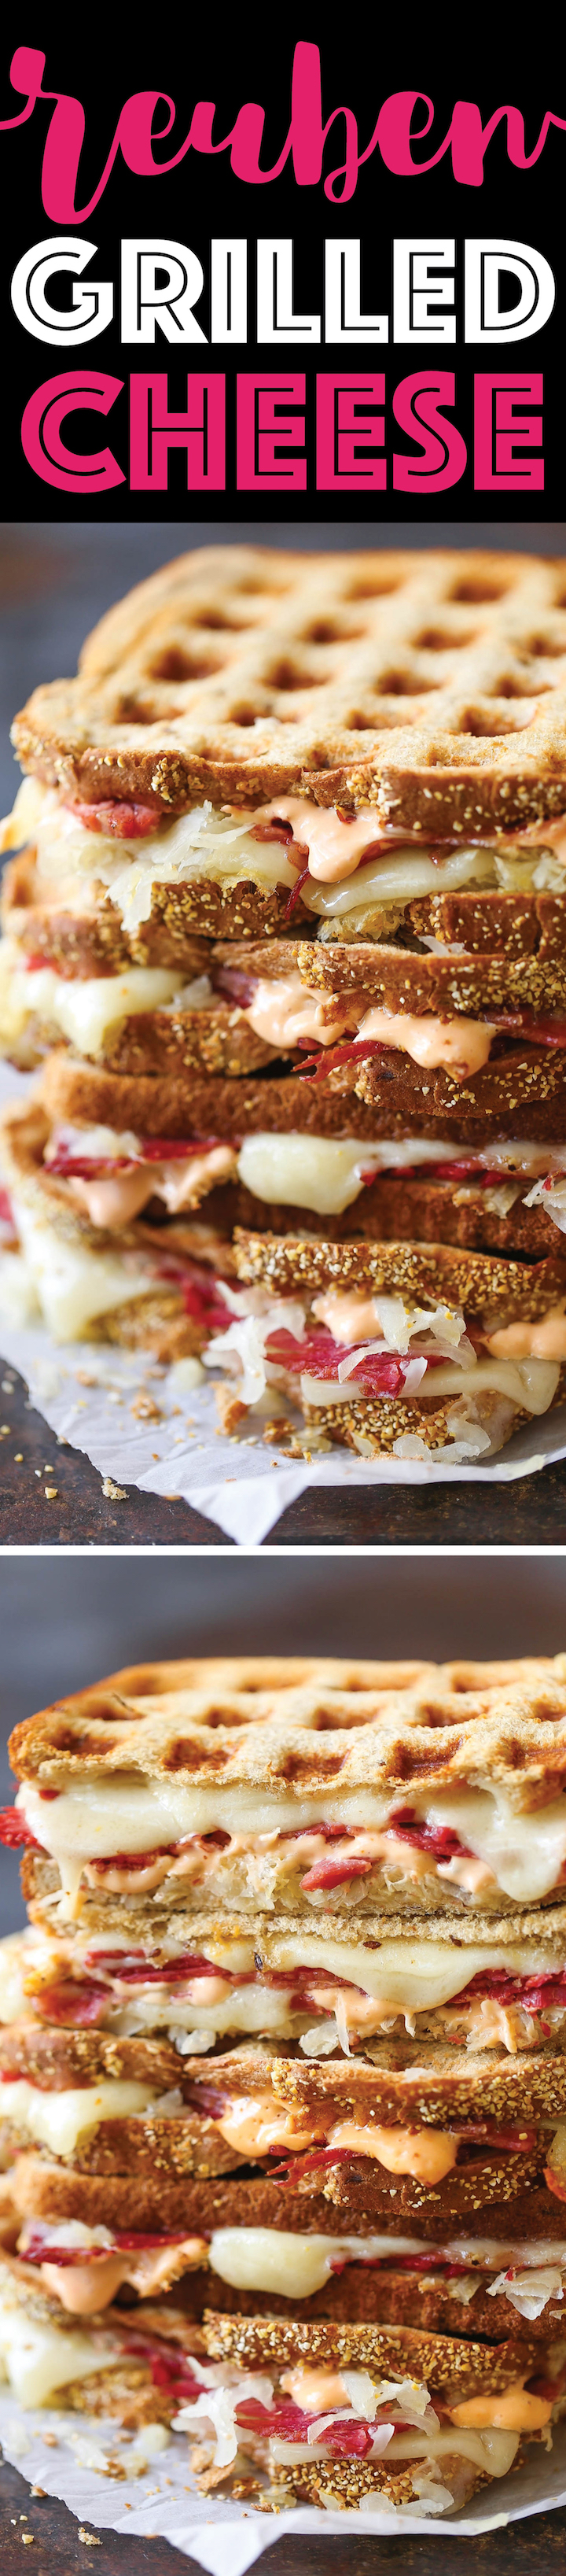 Reuben Grilled Cheese - A classic American sandwich! Corned beef, melted Swiss, sauerkraut, and Thousand Island dressing. So cheesy and just so darn easy!